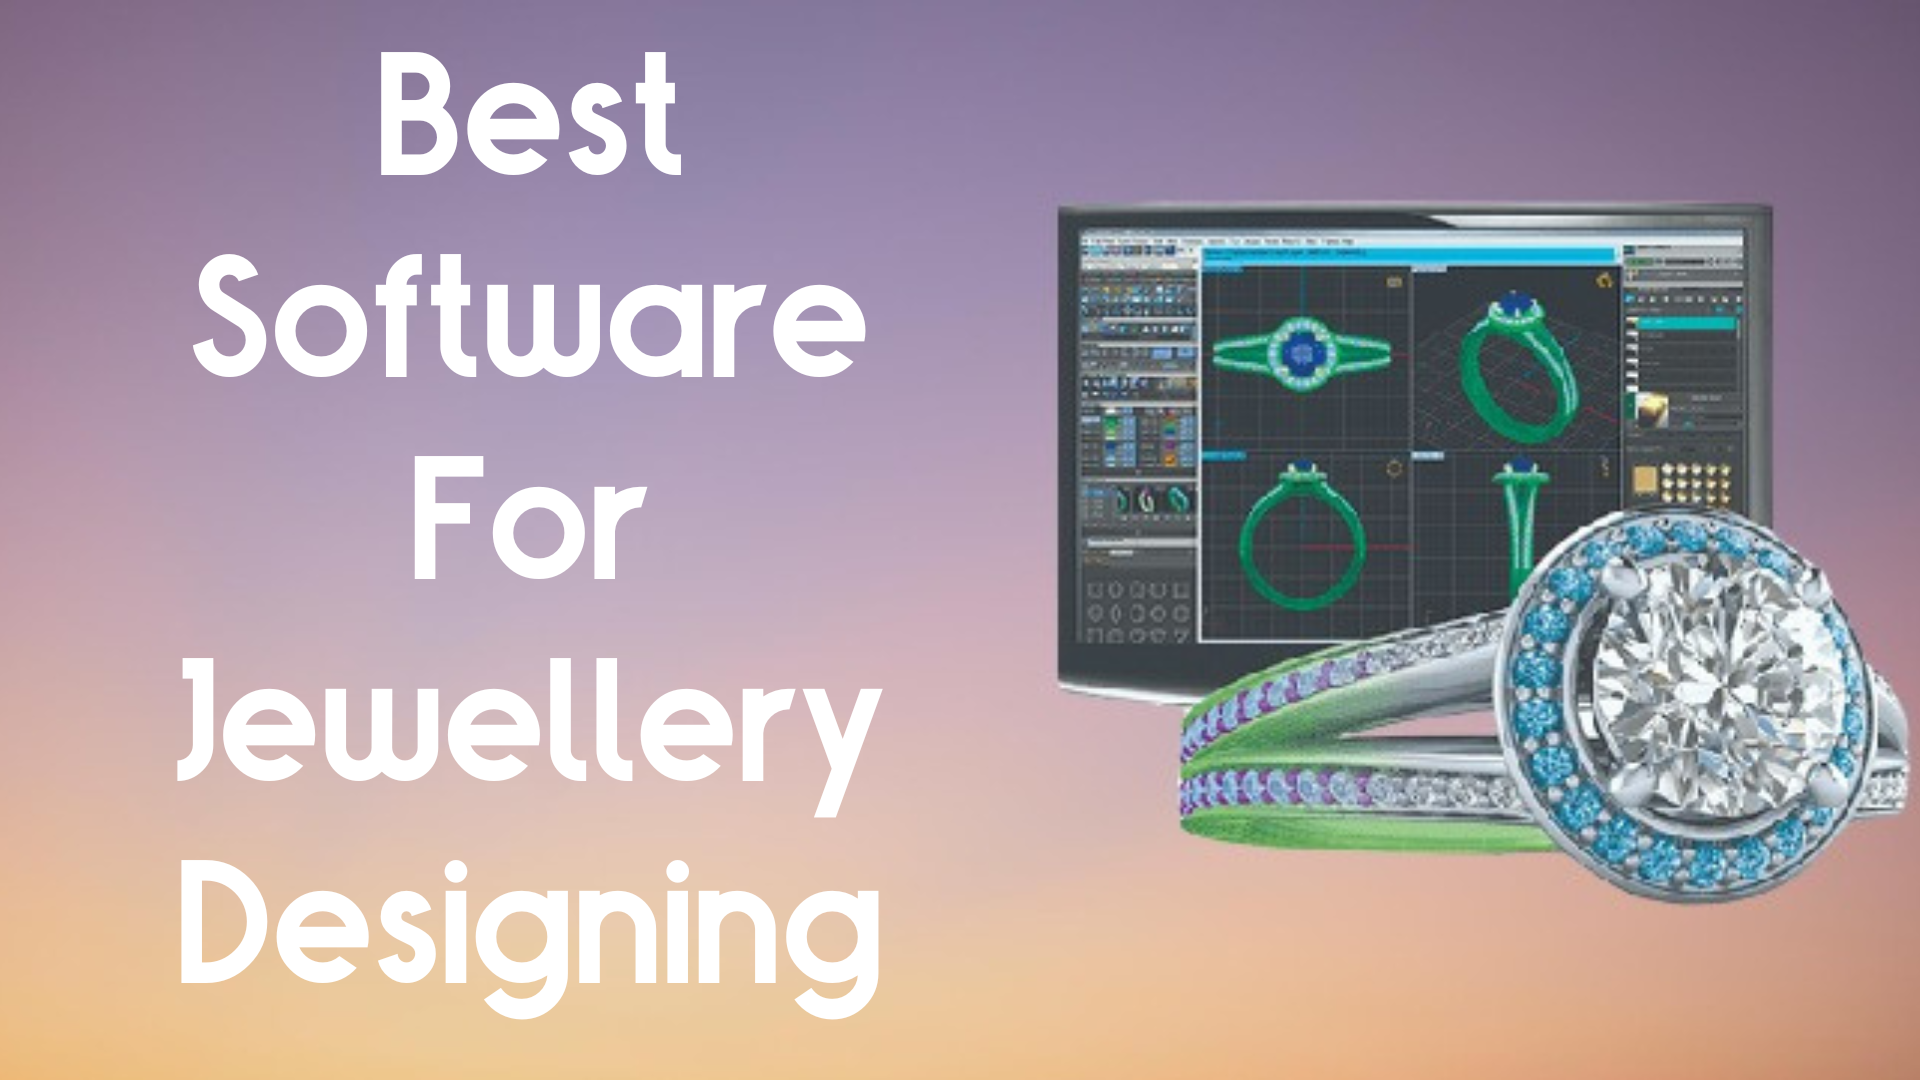 Best Software For Jewellery Designing